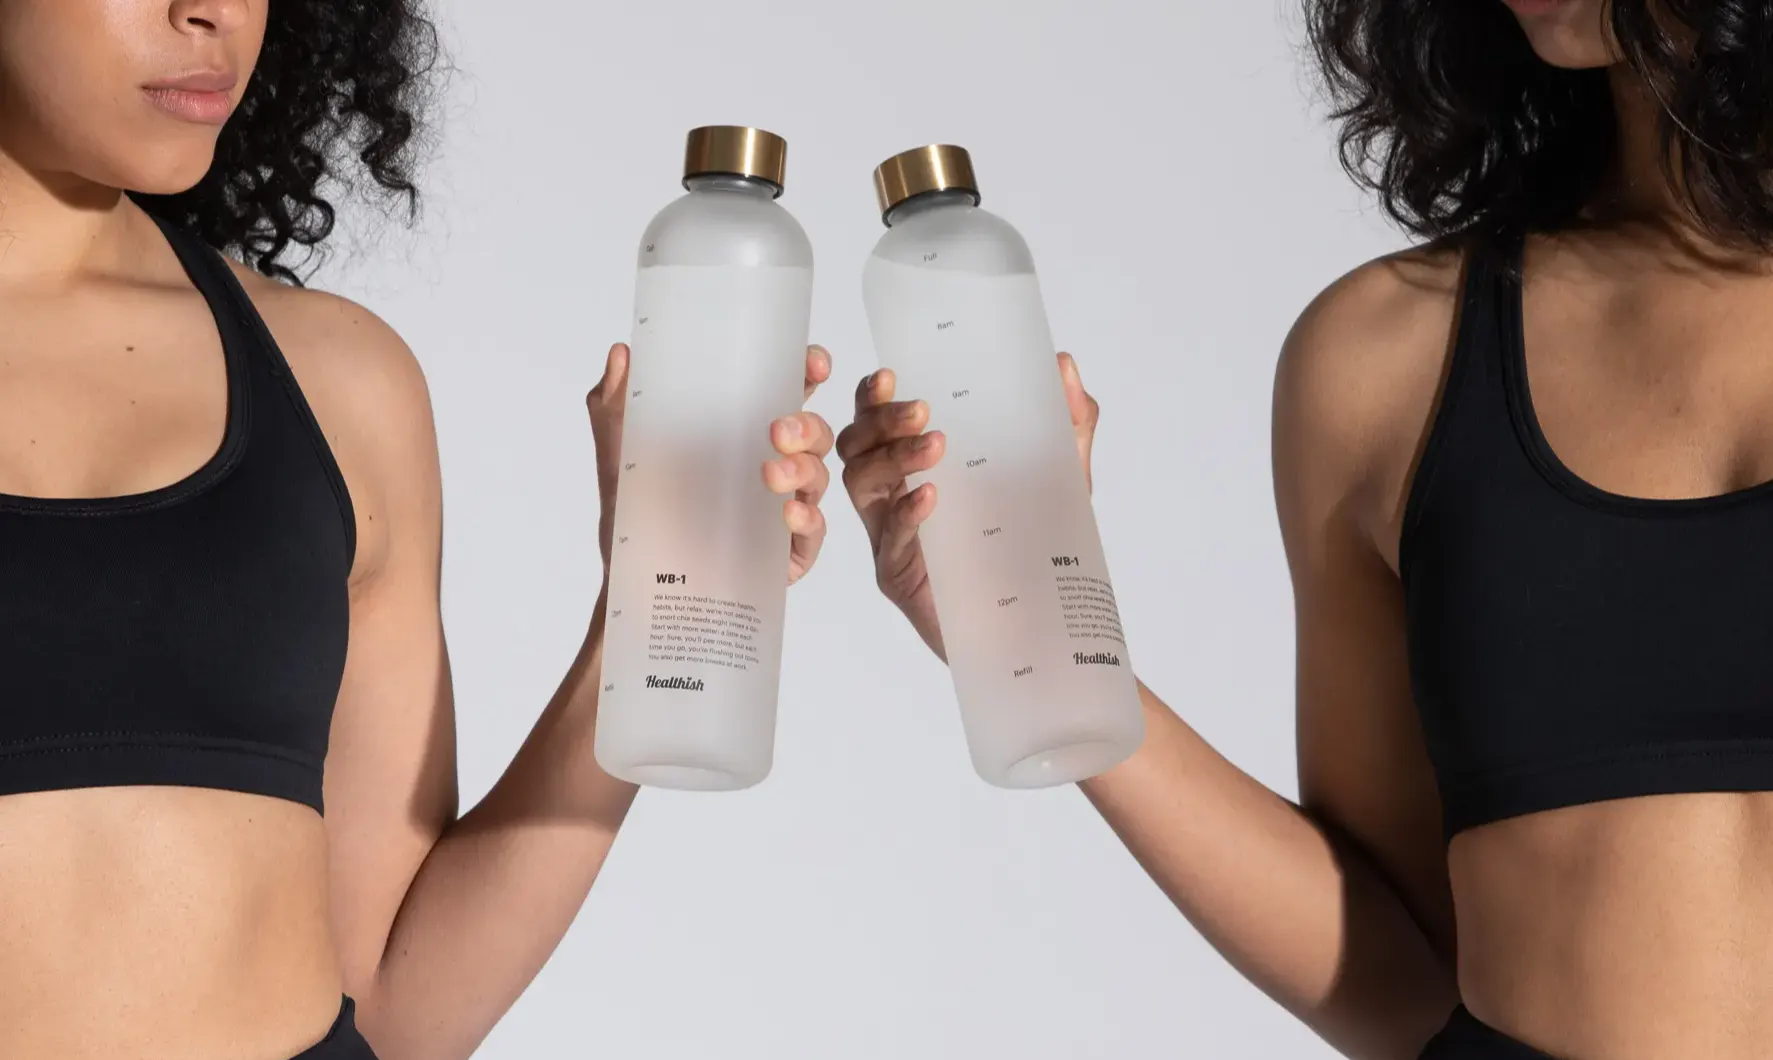 Two women model the Healthish water bottle, a product developed through a detailed pre-launch strategy.